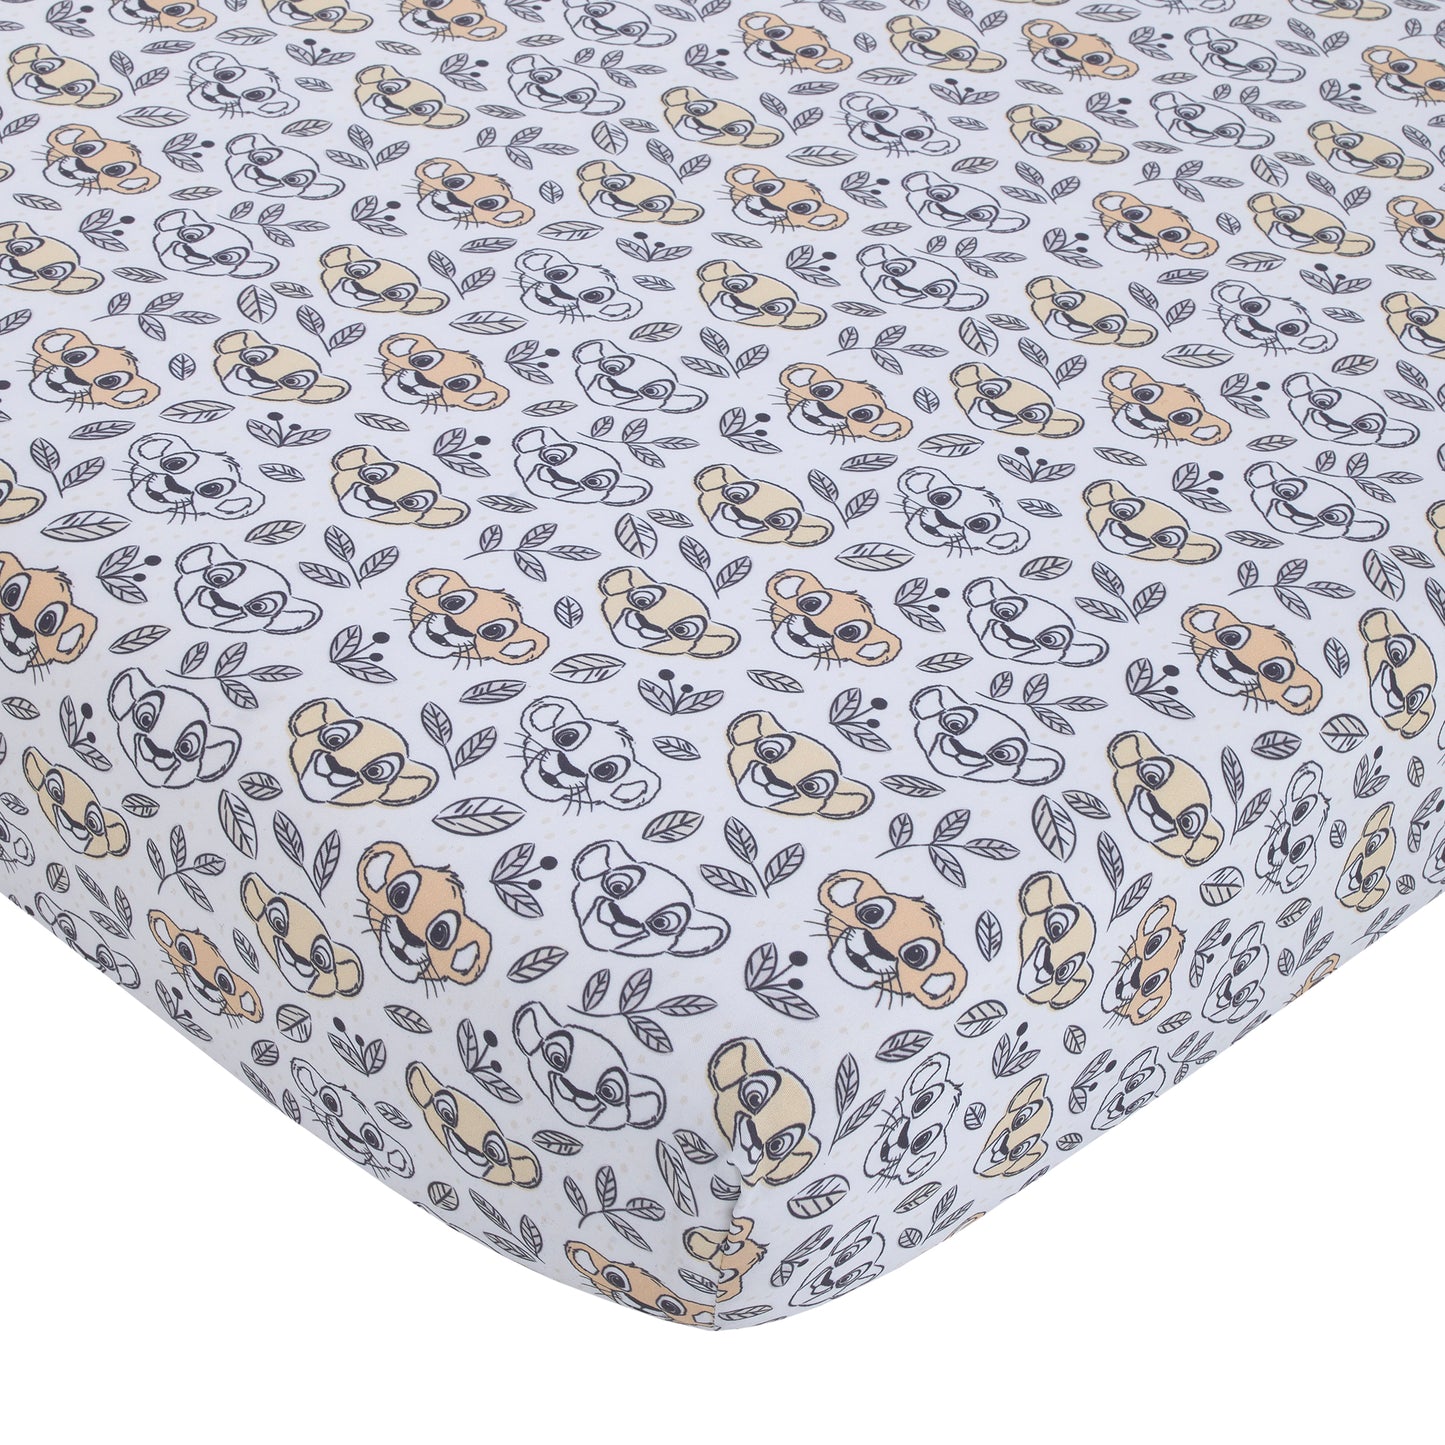 Disney Lion King Daddy's Little Cub Grey, White and Tan Simba and Nala 6 Piece Nursery Crib Bedding Set - Comforter, Two Fitted Crib Sheets, Crib Skirt, Blanket and Changing Pad Cover